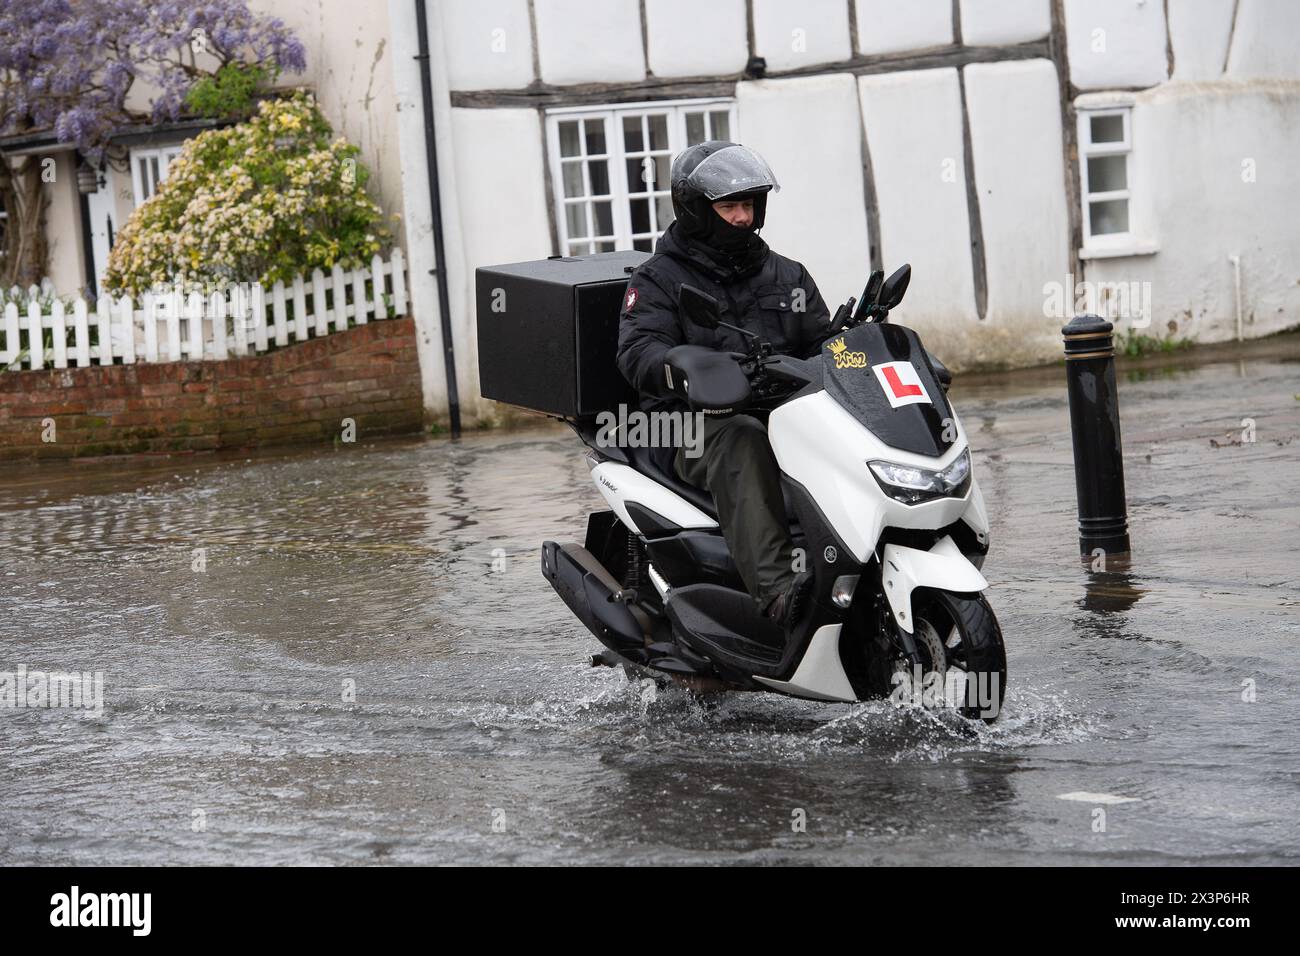 Chalfont St Giles, Buckinghamshire, UK. 28th April, 2024. A motorcyclist driving through floodwater. Parts of the village of Chalfont St Giles in Buckinghamshire was flooded again today after heavy overnight rain. There are ongoing issues with groundwater flooding across the Chalfonts. Credit: Maureen McLean/Alamy Live News Stock Photo